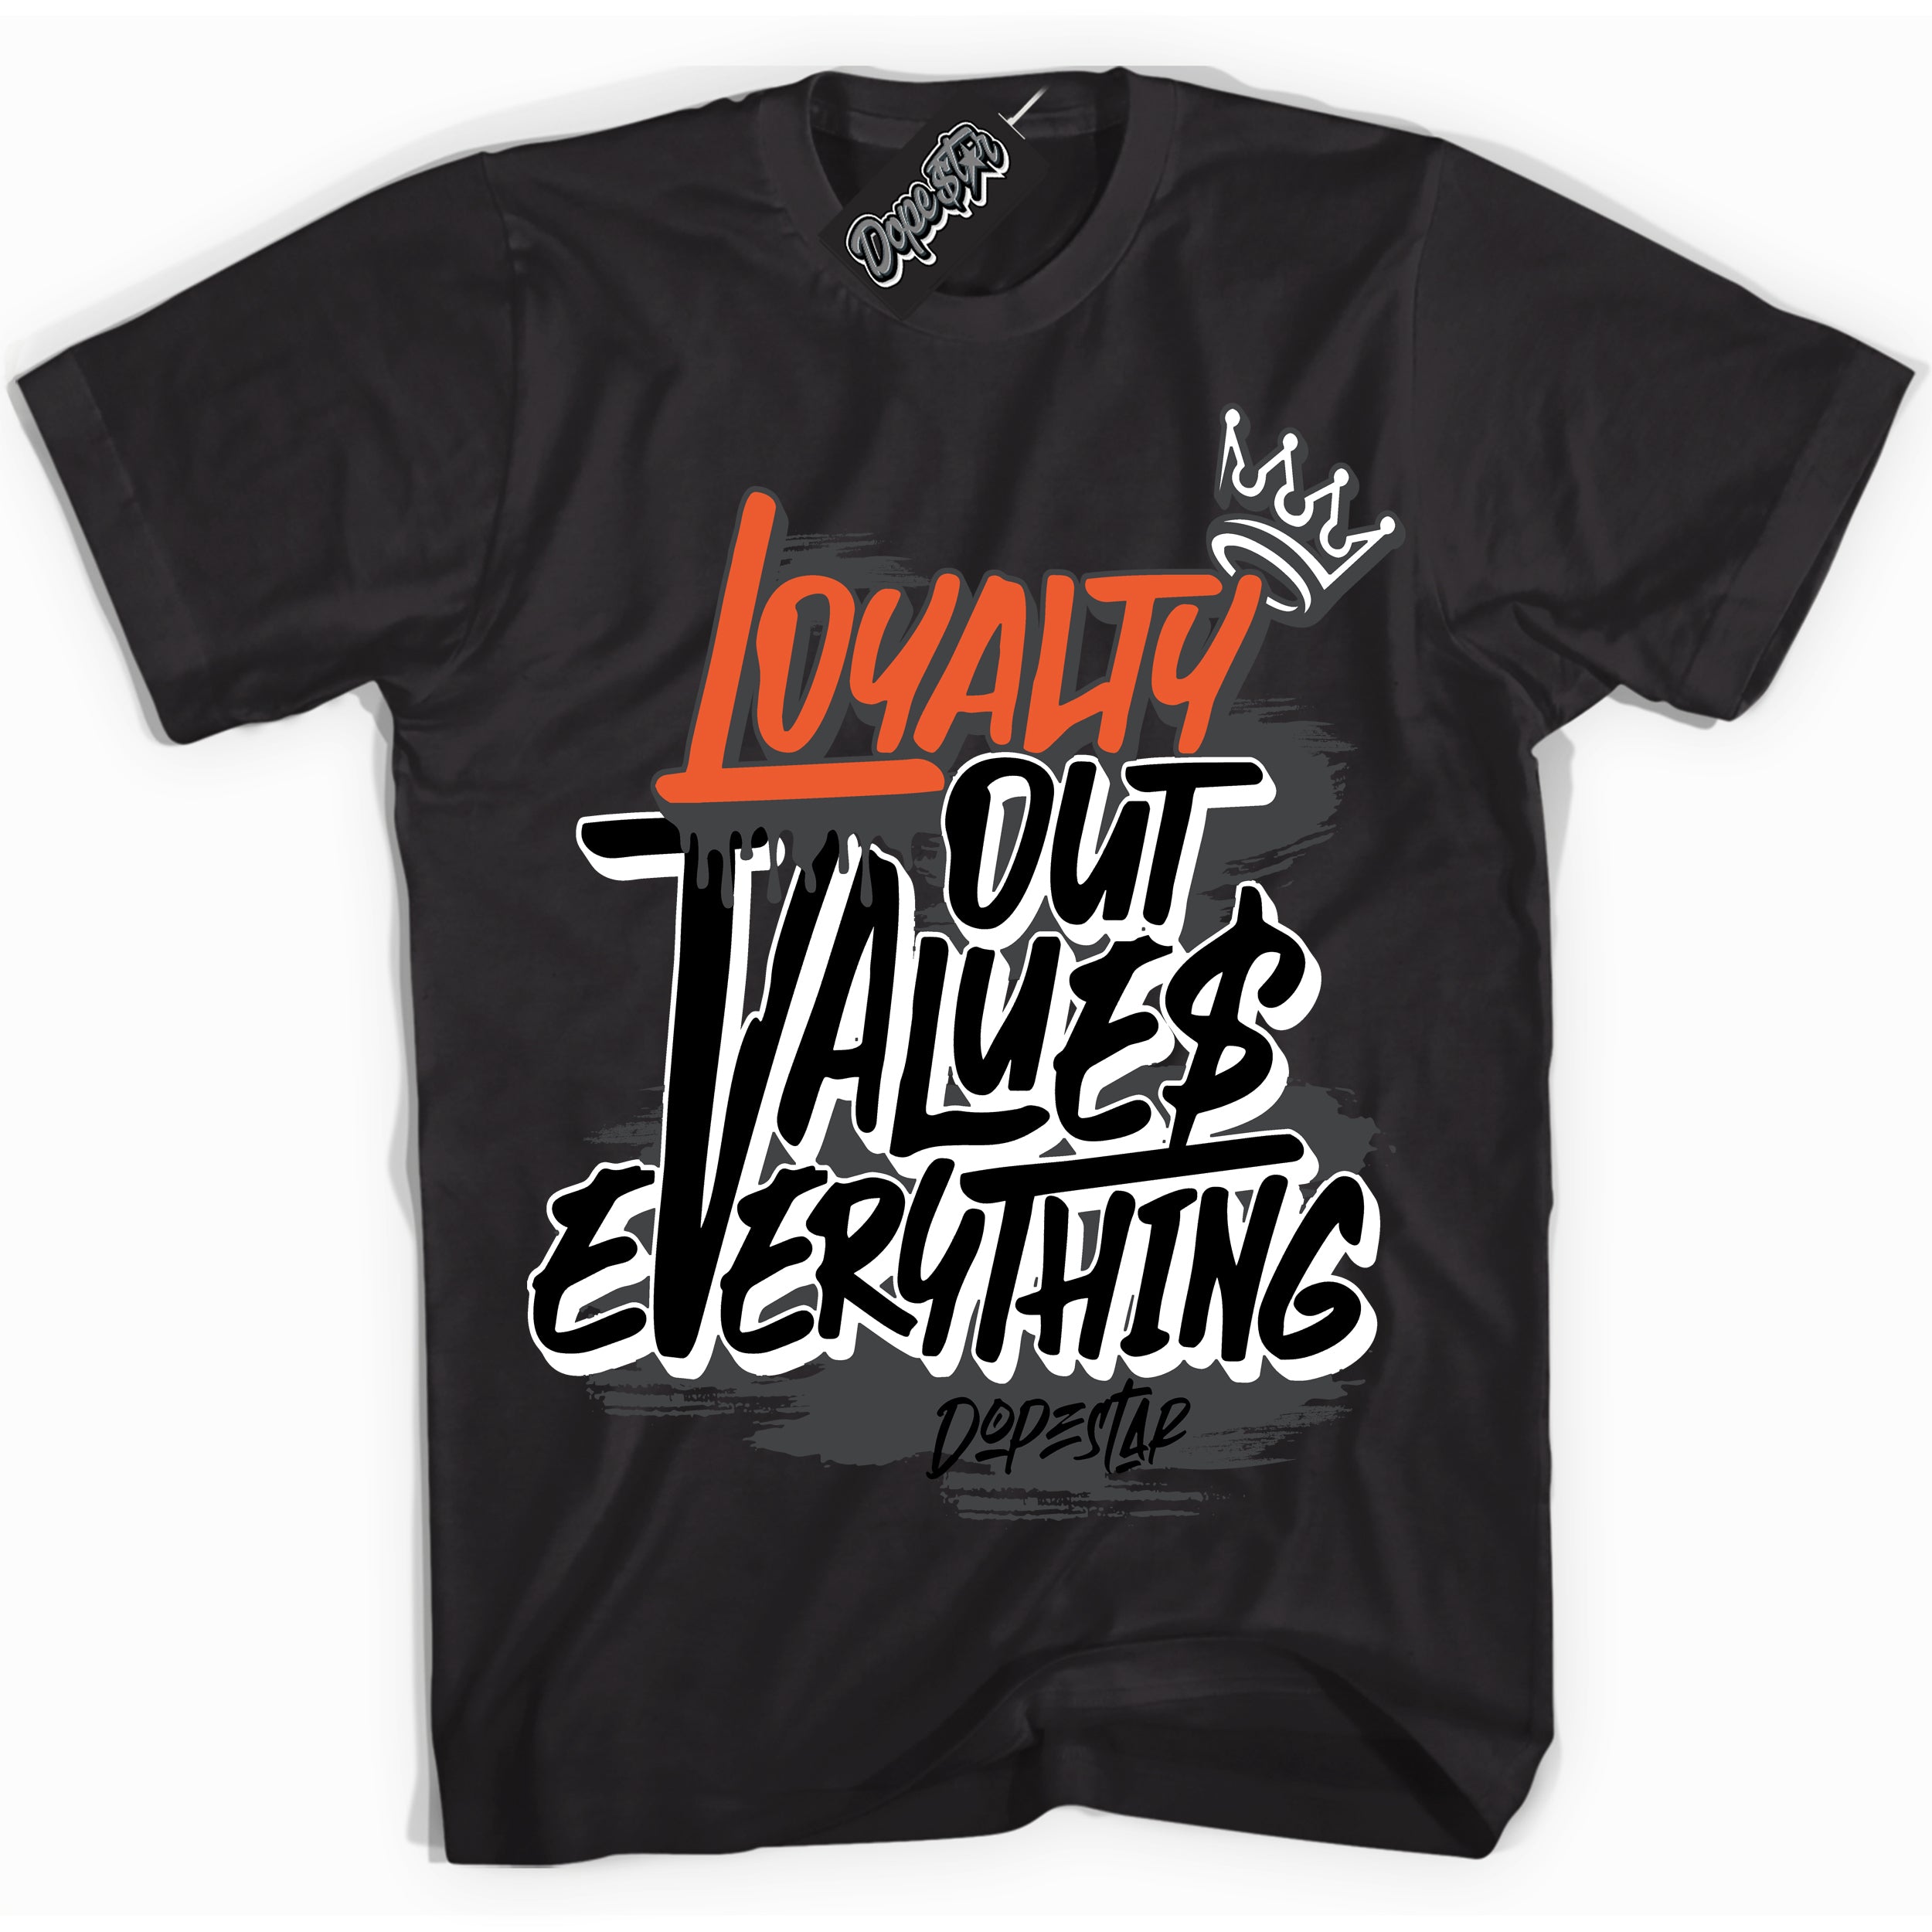 Cool Black Shirt with “ Loyalty Out Values Everything” design that perfectly matches Stash 1s Sneakers.